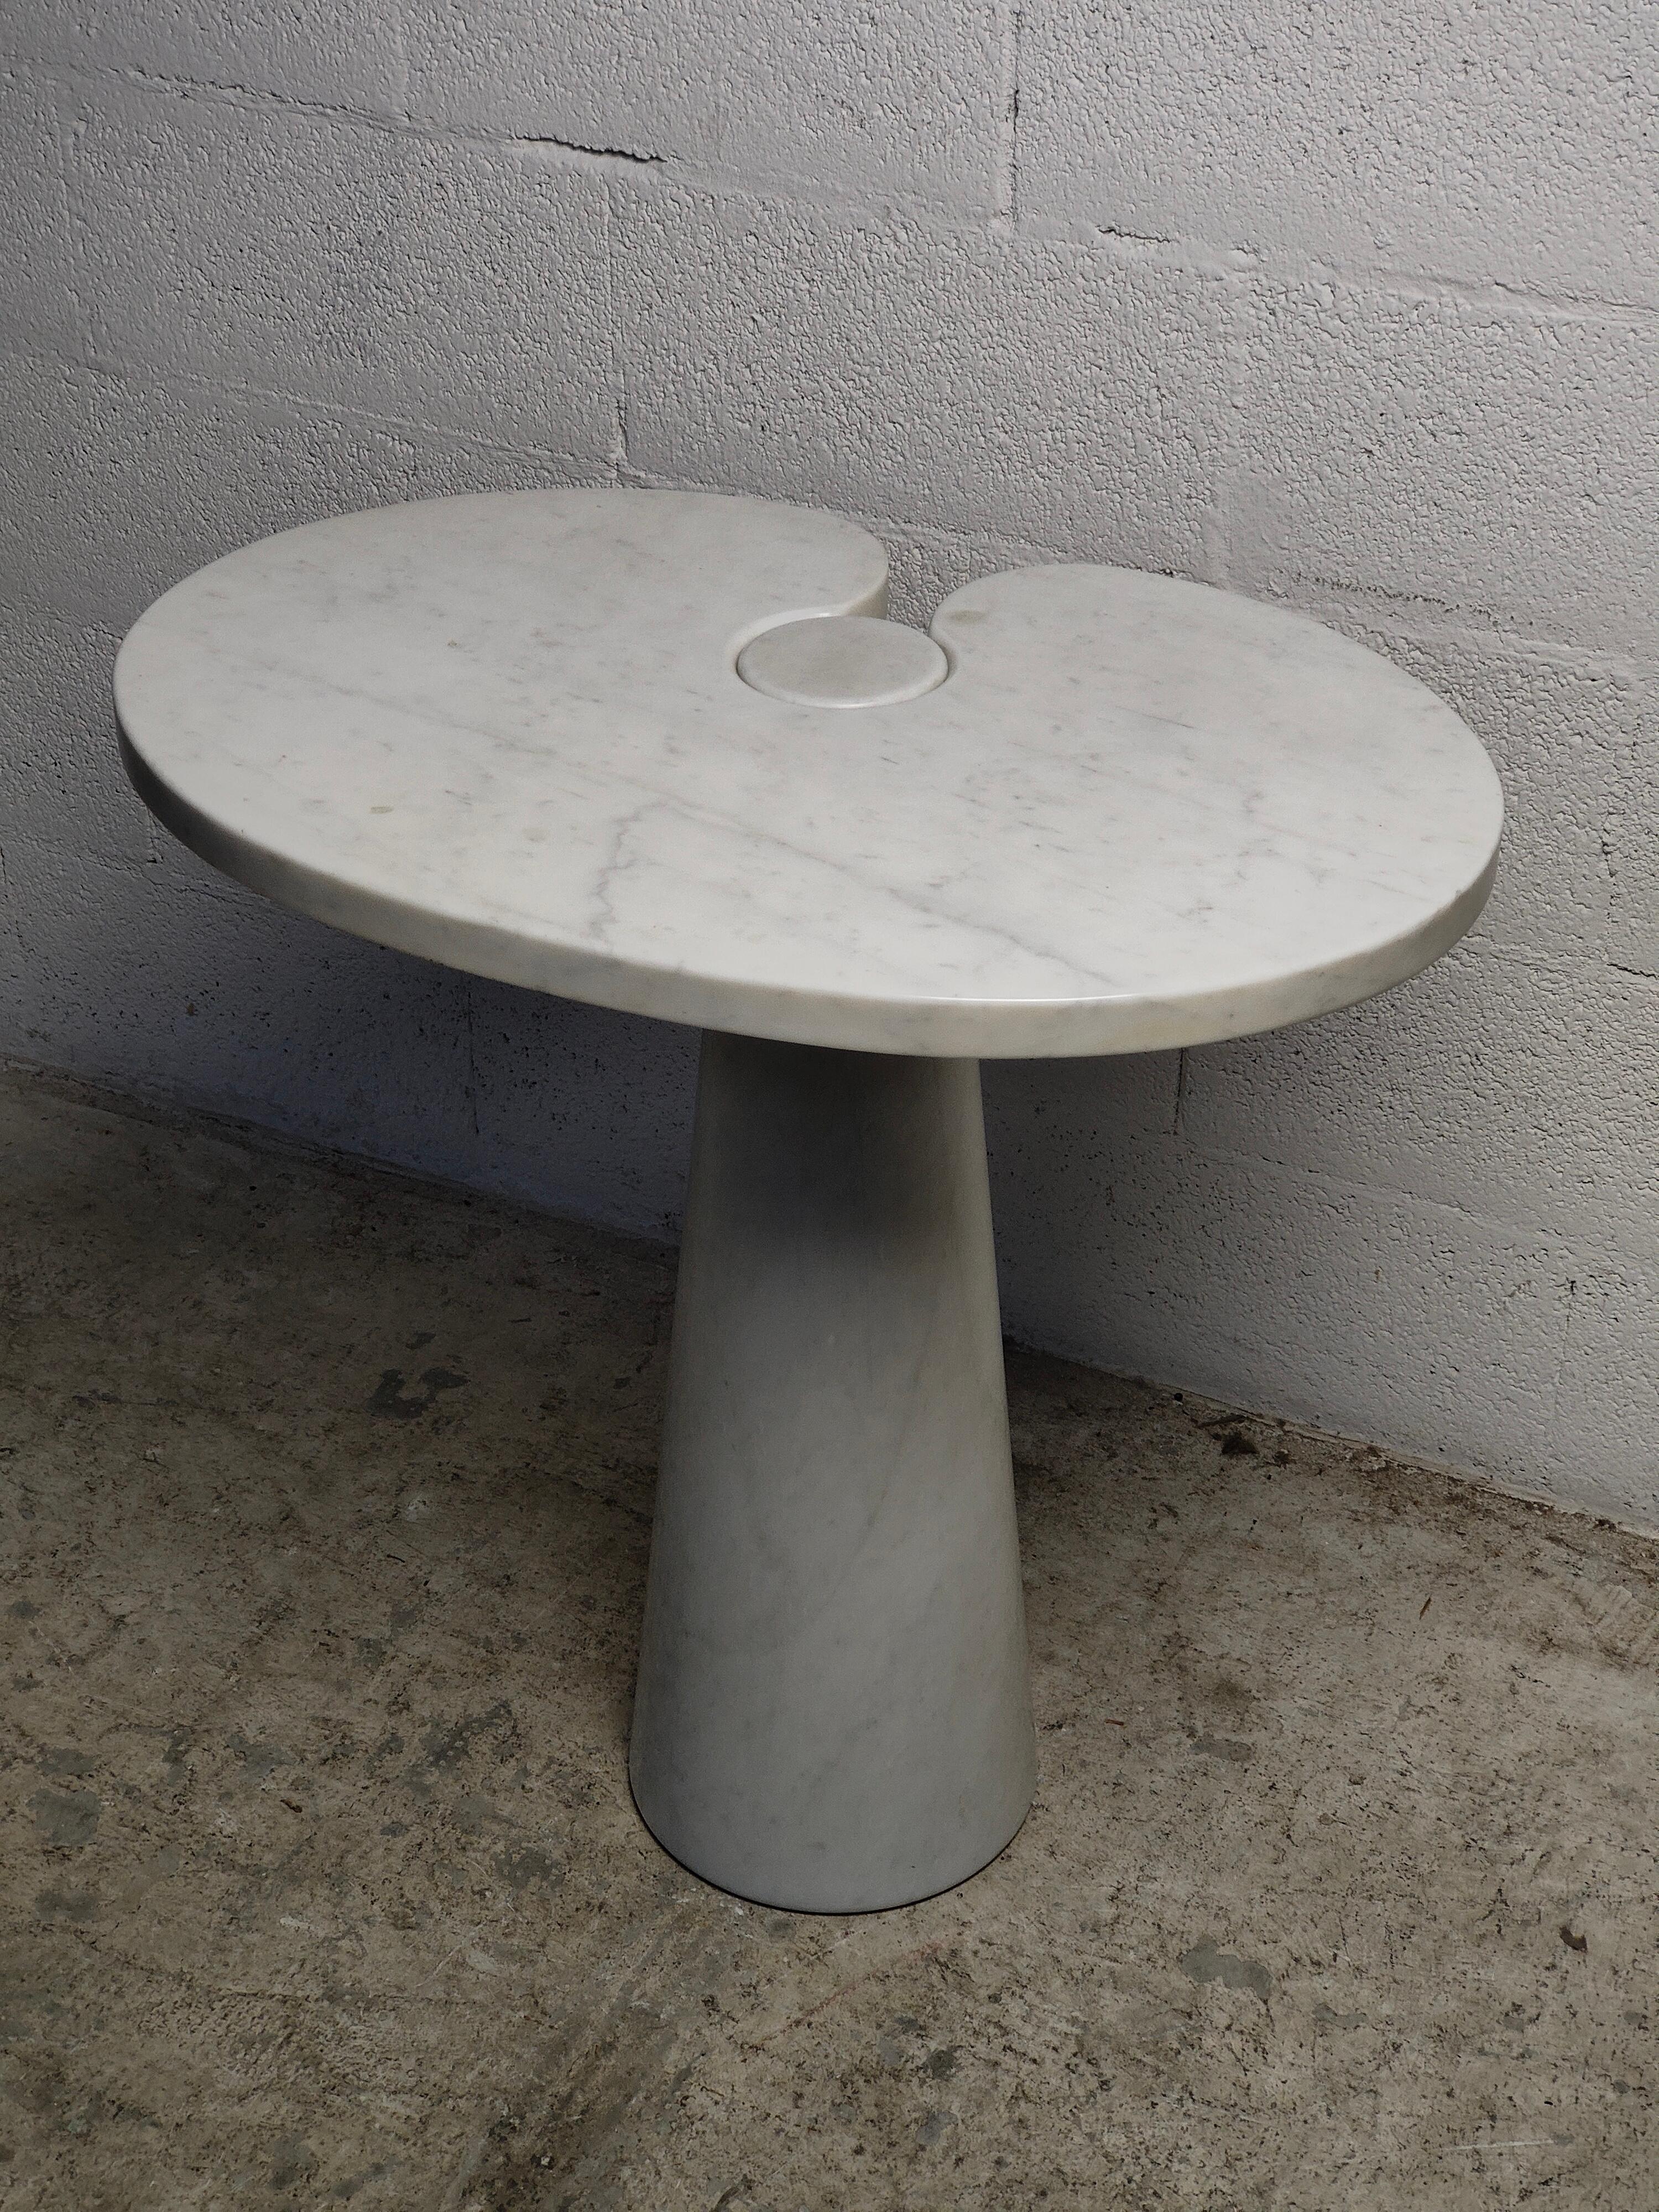 Eros Carrara Marble Side Table by Angelo Mangiarotti for Skipper 70s 2